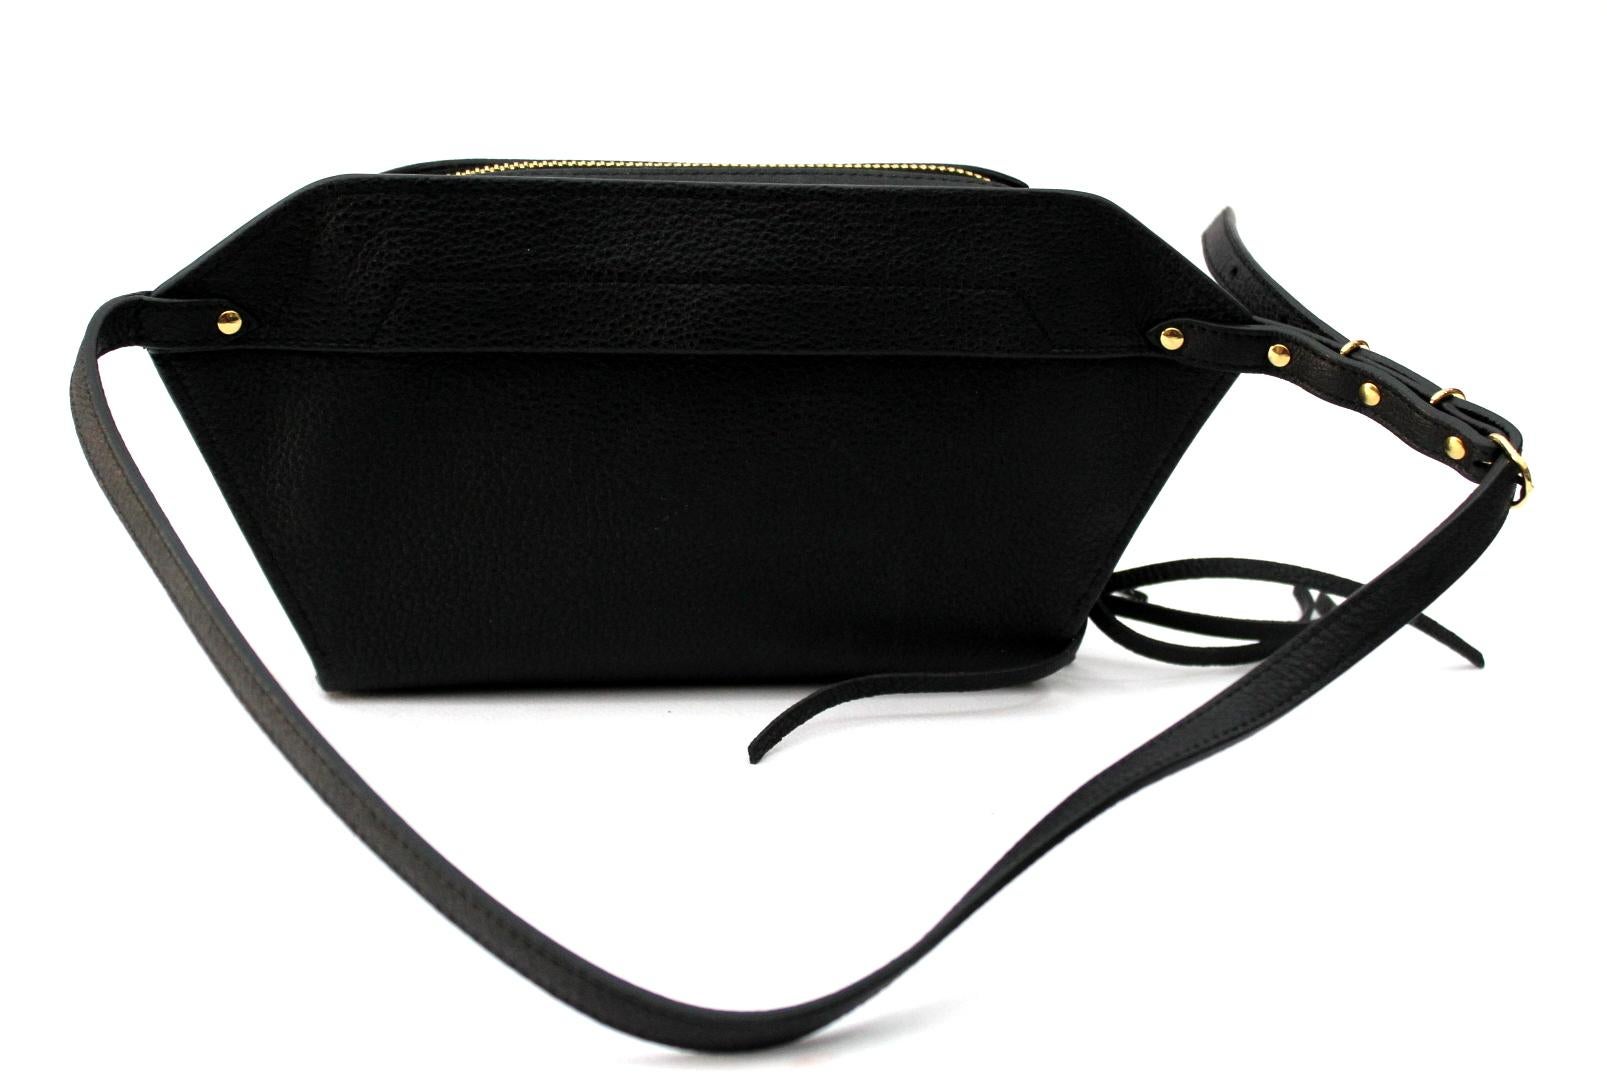 Balenciaga belt bag in black leather with gold hardware.
Zipper closure. Thin and adjustable belt.
Internally equipped with pockets.
Equipped also with two external pockets, one on the front and the other on the back.
VERY GOOD CONDITION!